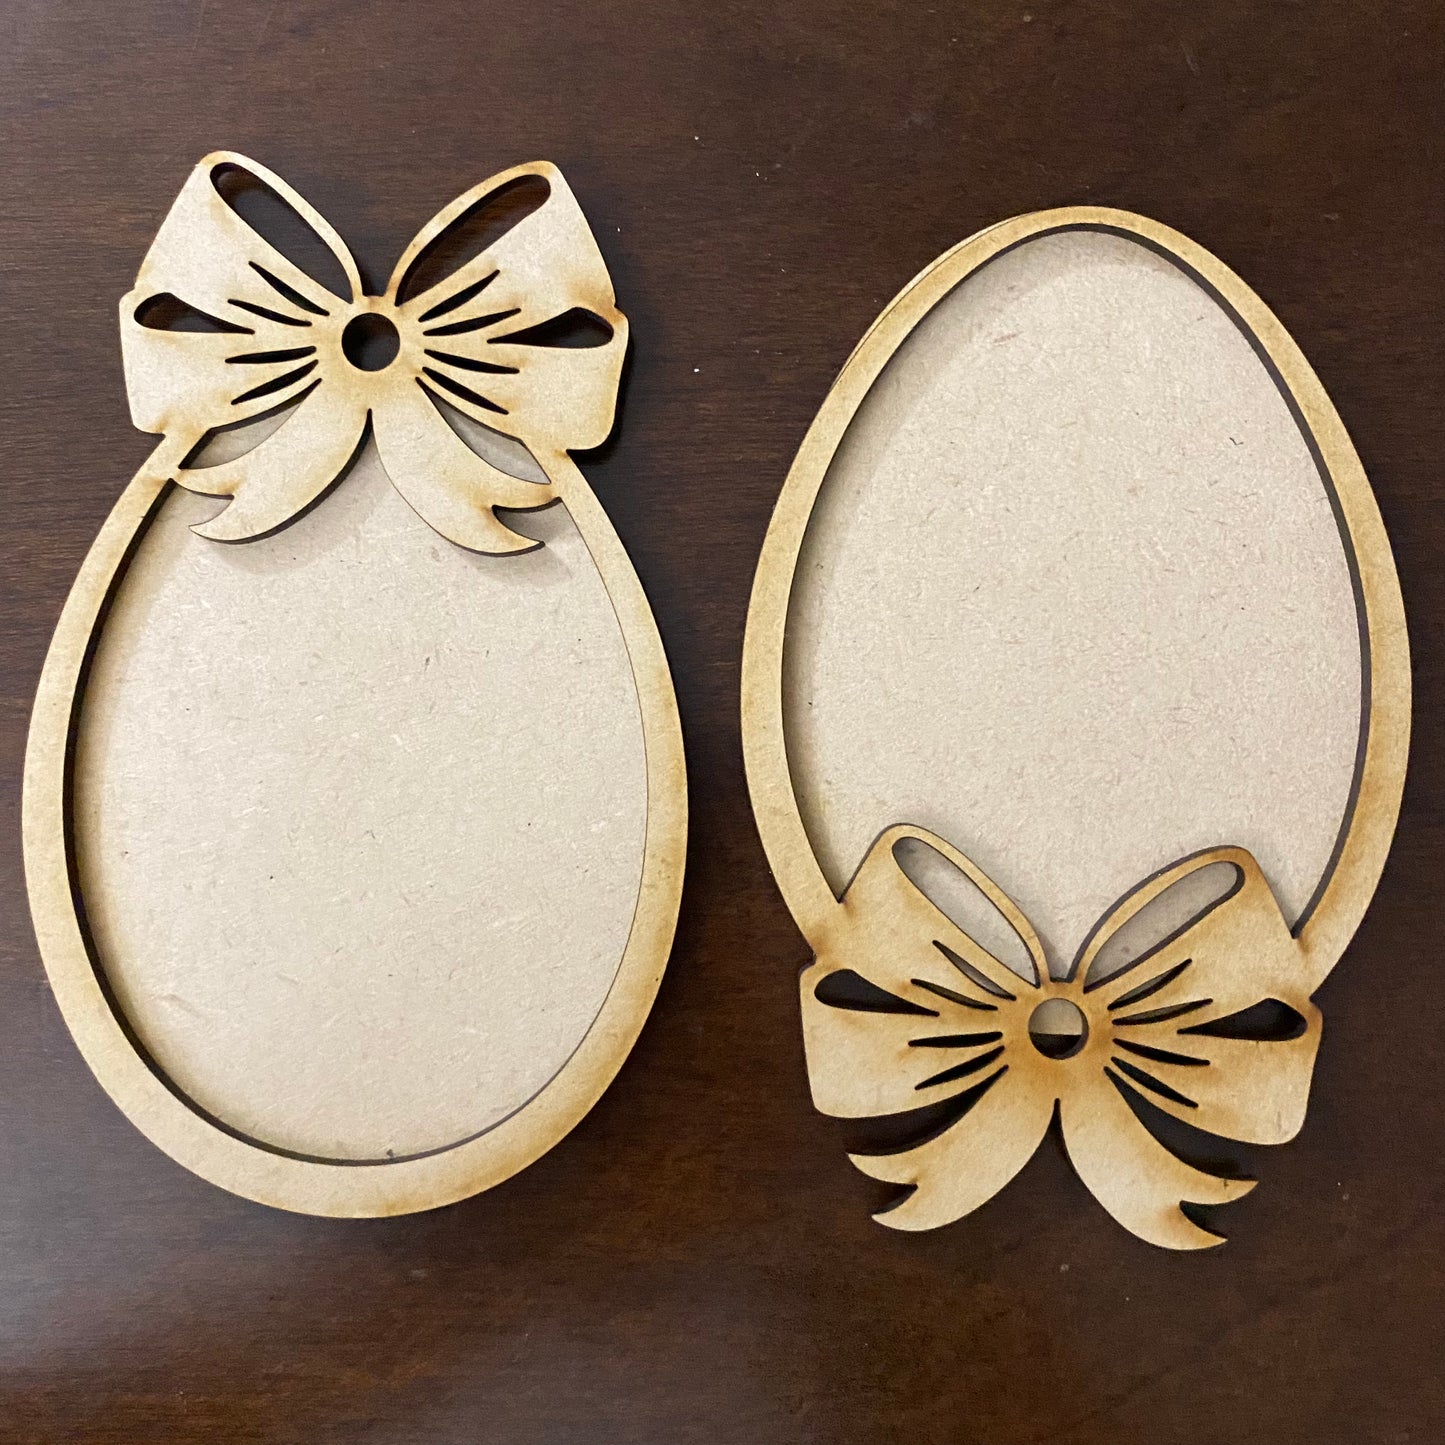 Set of 2 Easter Egg Ornaments with Bows